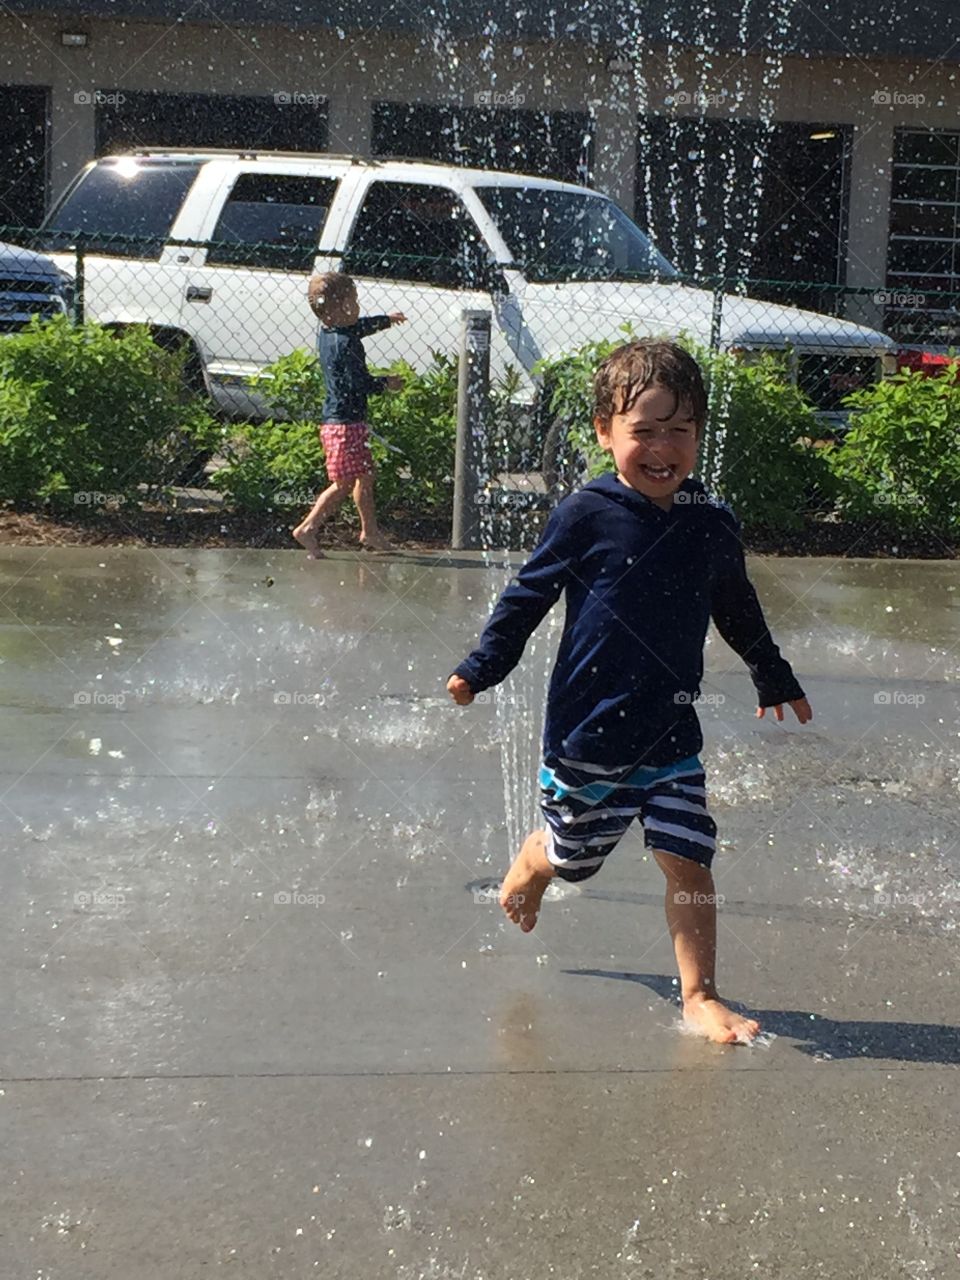 Playing in the Fountain in the Summer